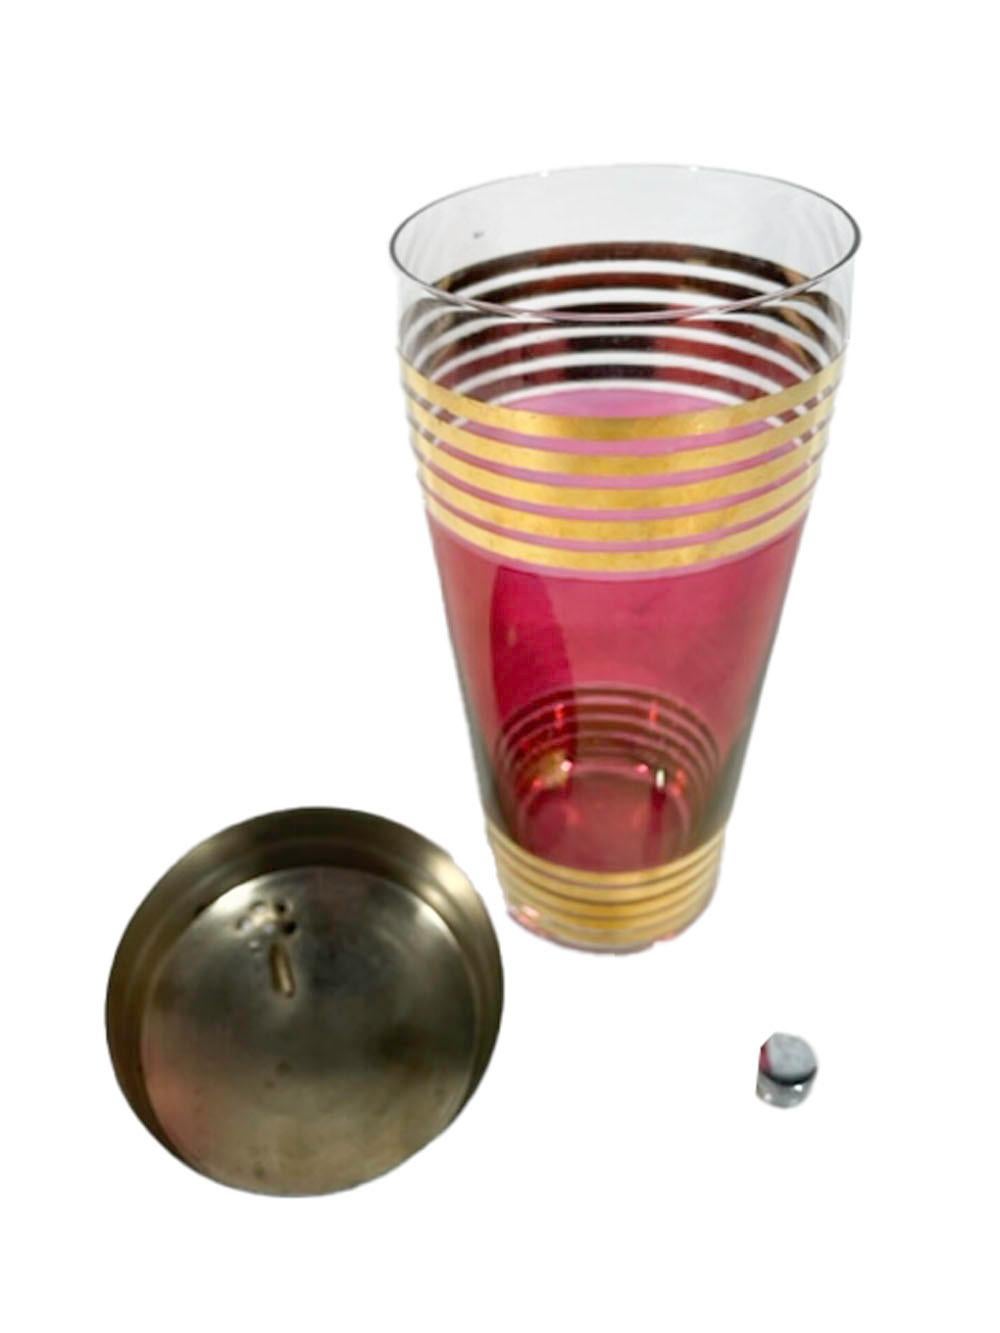 20th Century Art Deco Cocktail Shaker Flashed Ruby Between Groups of 22 Karat Gold Bands For Sale